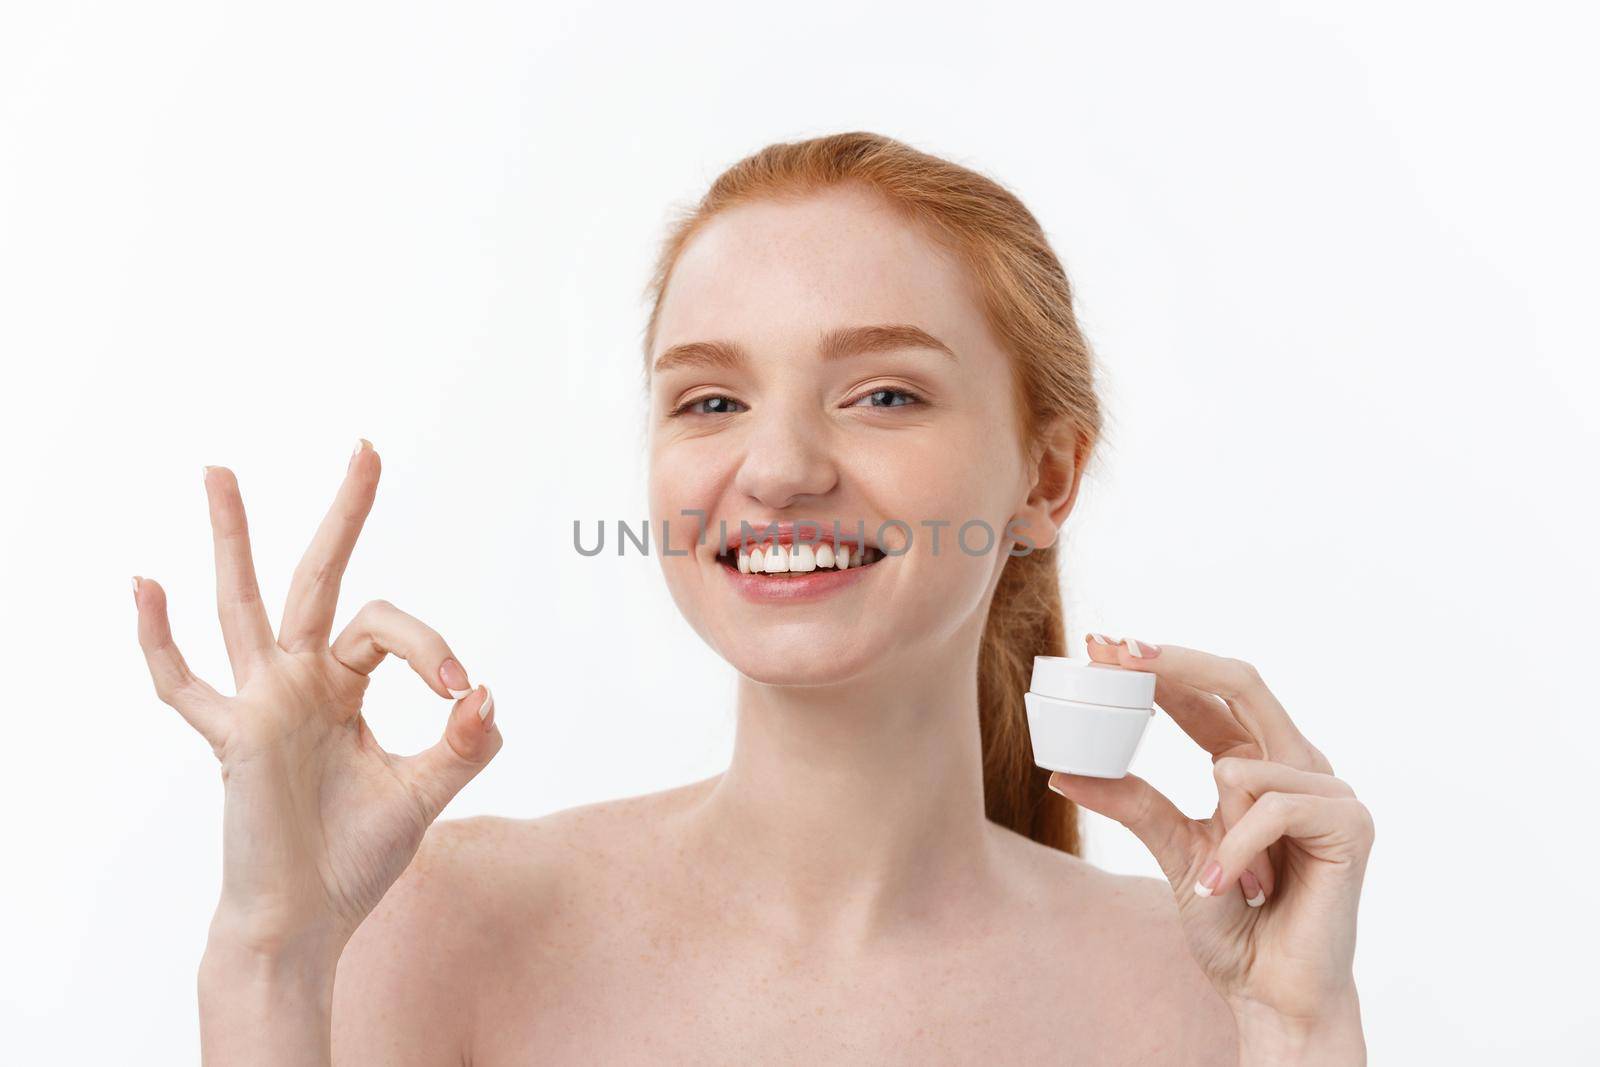 portrait of beautiful woman smiling while taking some facial cream isolated on white background with copy space